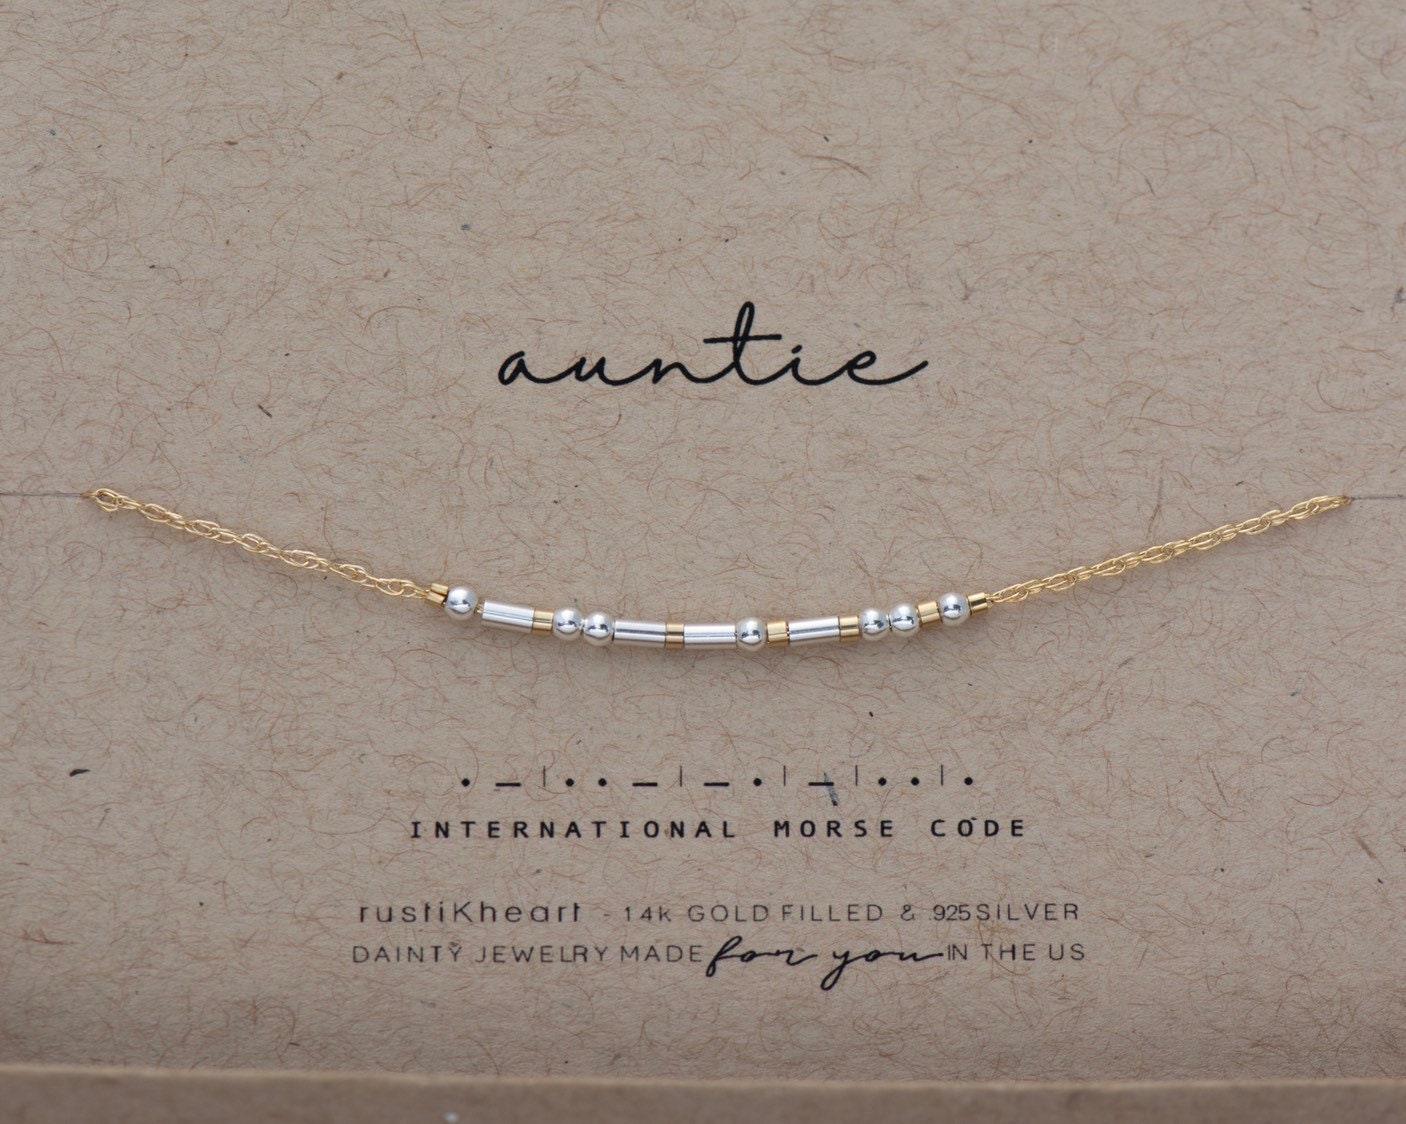 Auntie Morse Code Bracelet • AX.SS.ST.Y1.Y - Morse and Dainty